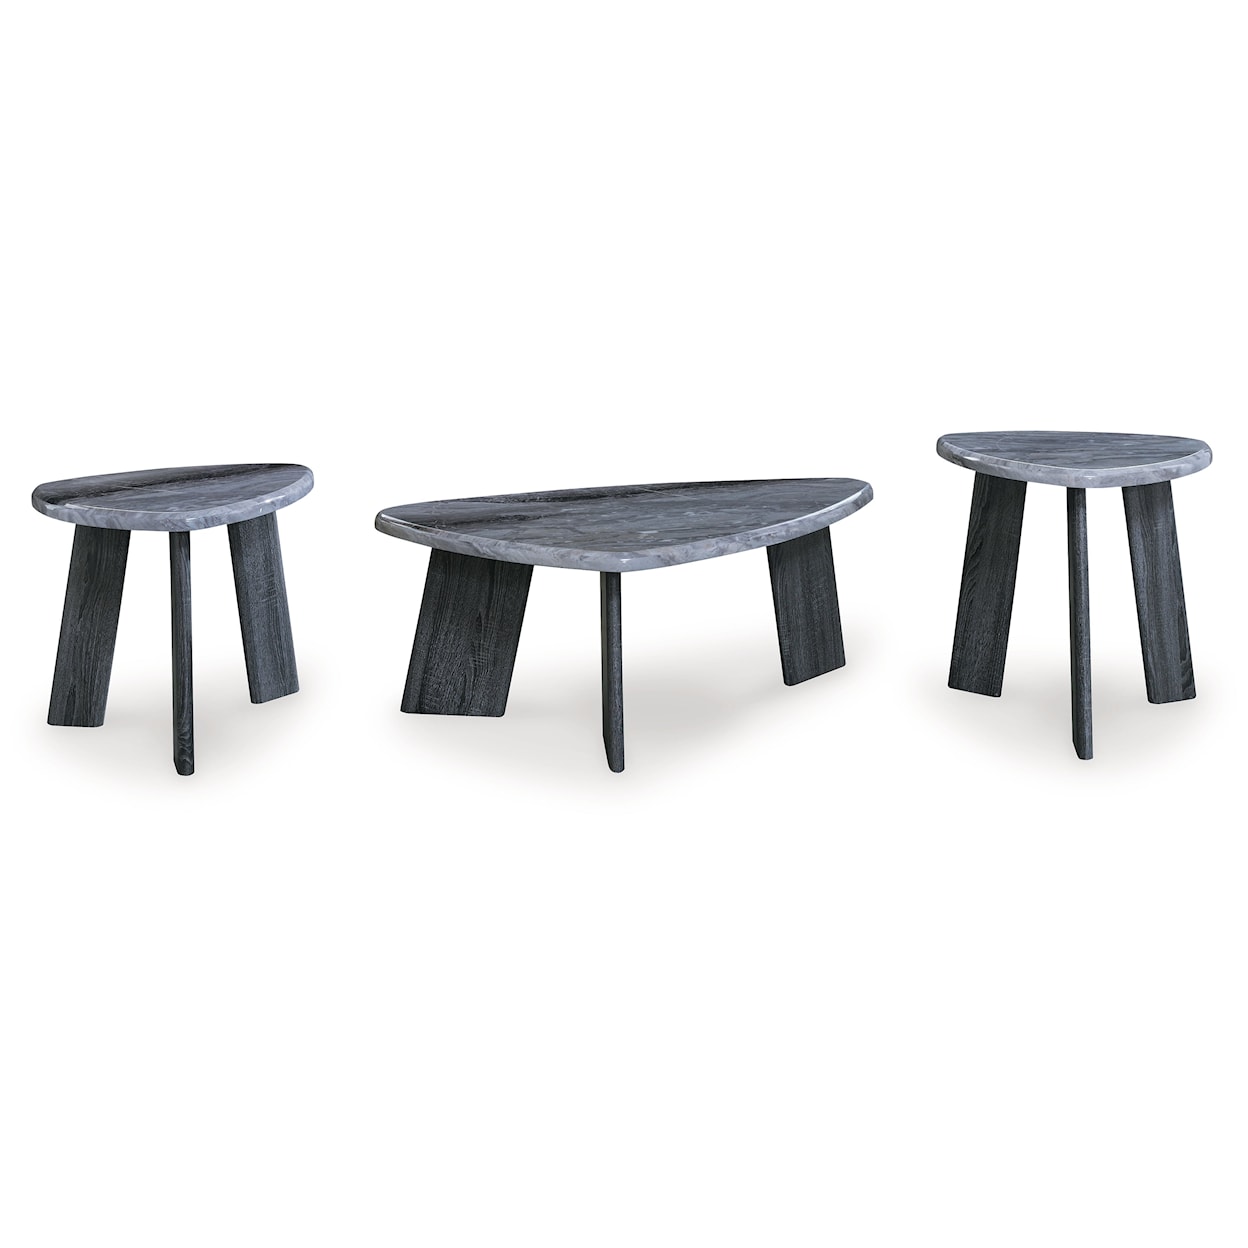 Signature Design by Ashley Bluebond Occasional Table (Set of 3)